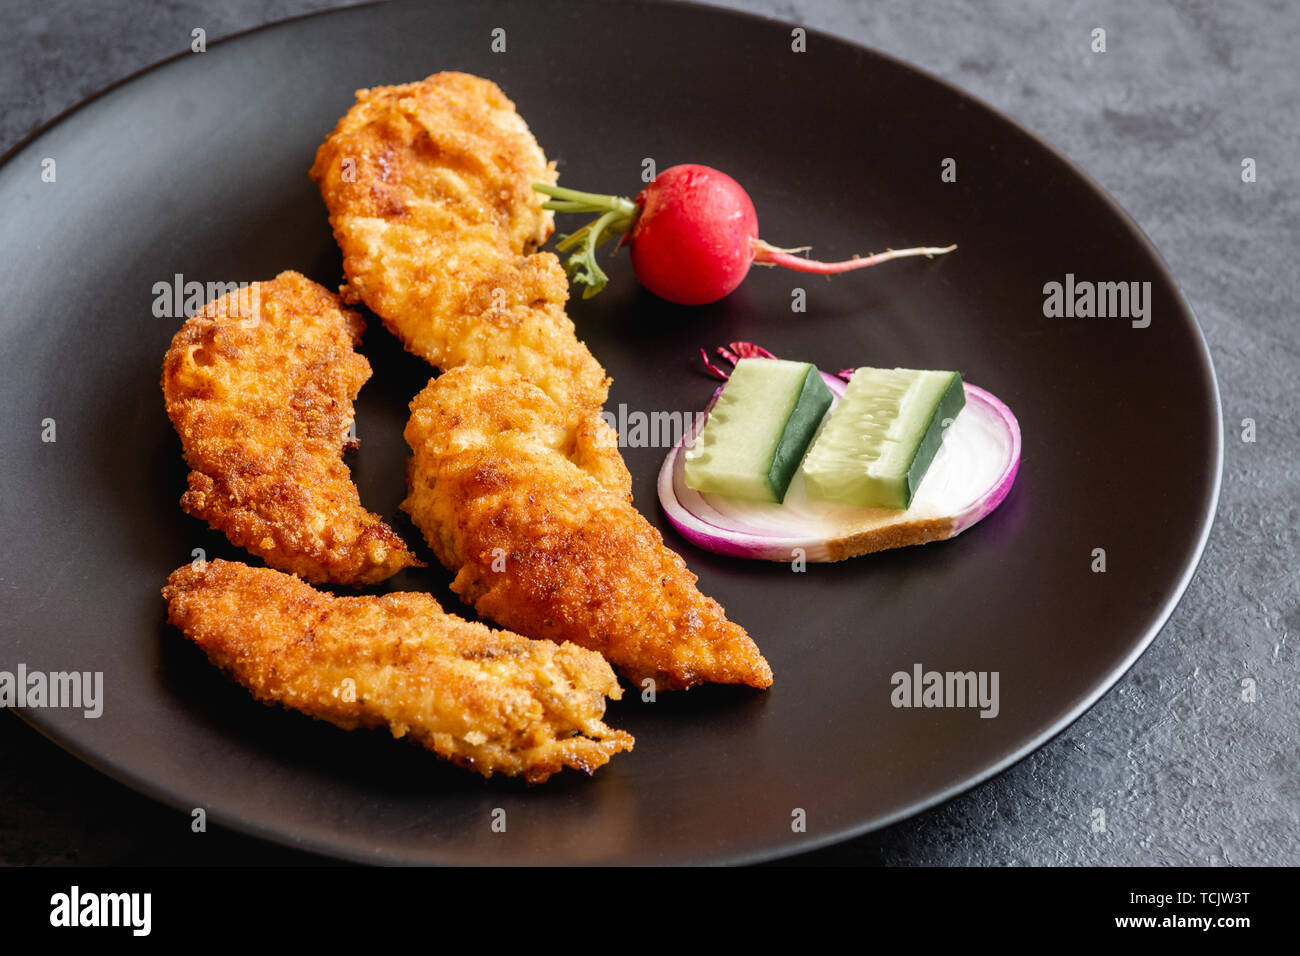 Fried chicken sirloin in breadcrumbs on a black dish. Stock Photo